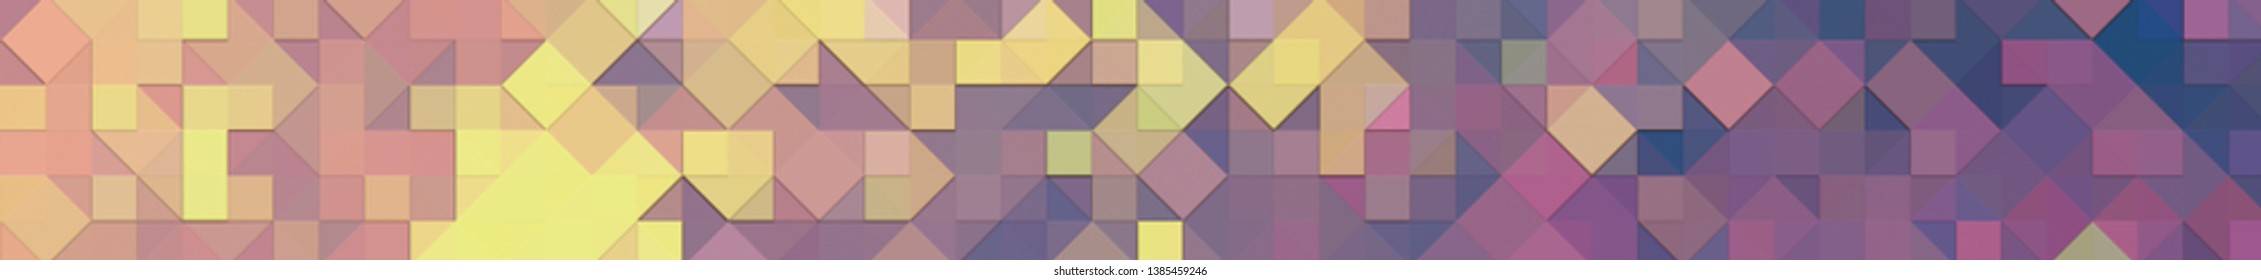 Panoramic multicolored background texture with mosaic. Geometric mosaic design. Abstract color trendy background. Mosaic texture with geometric shapes. - Shutterstock ID 1385459246